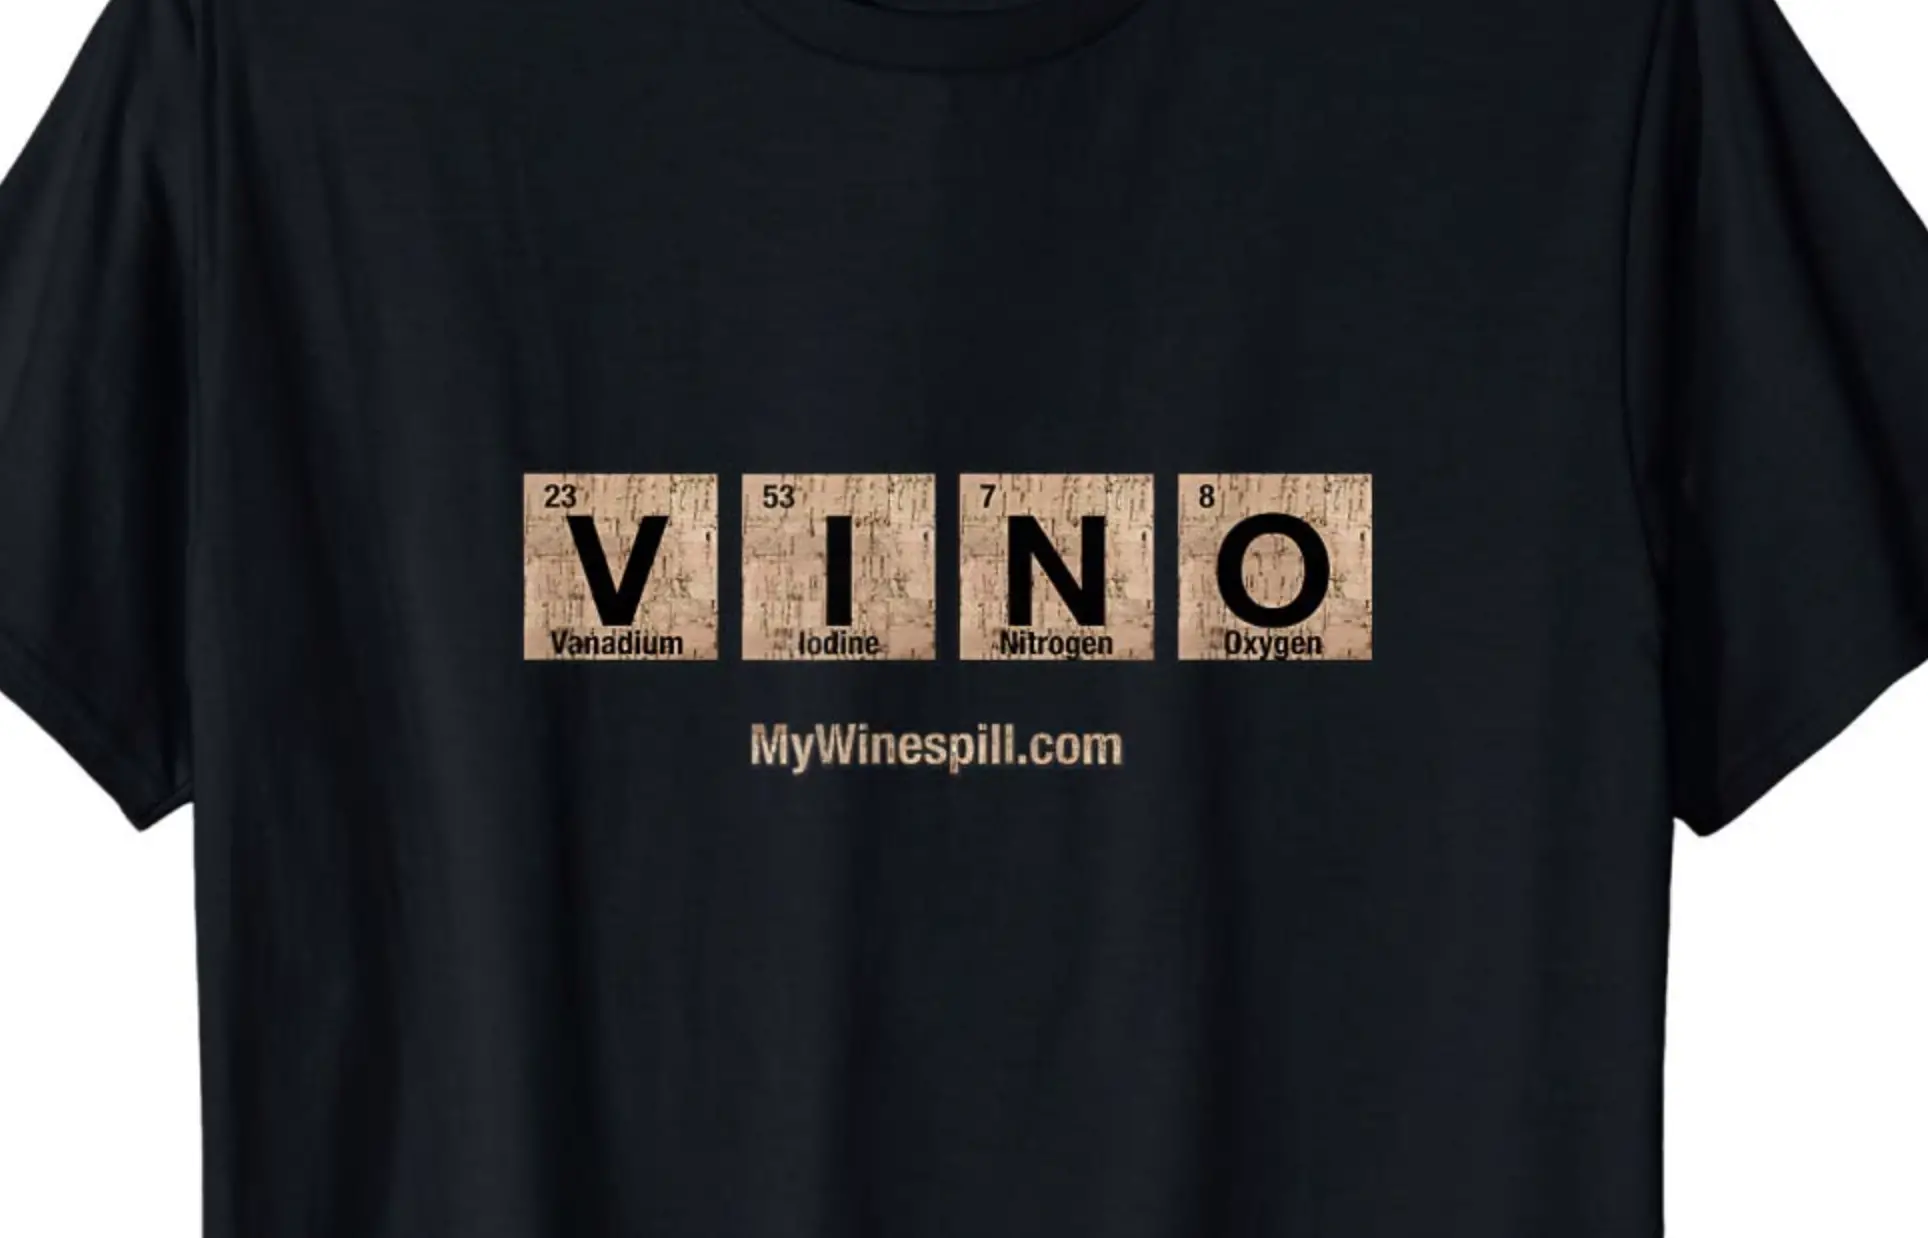 VINO Chemical Compounds in the Periodic Table